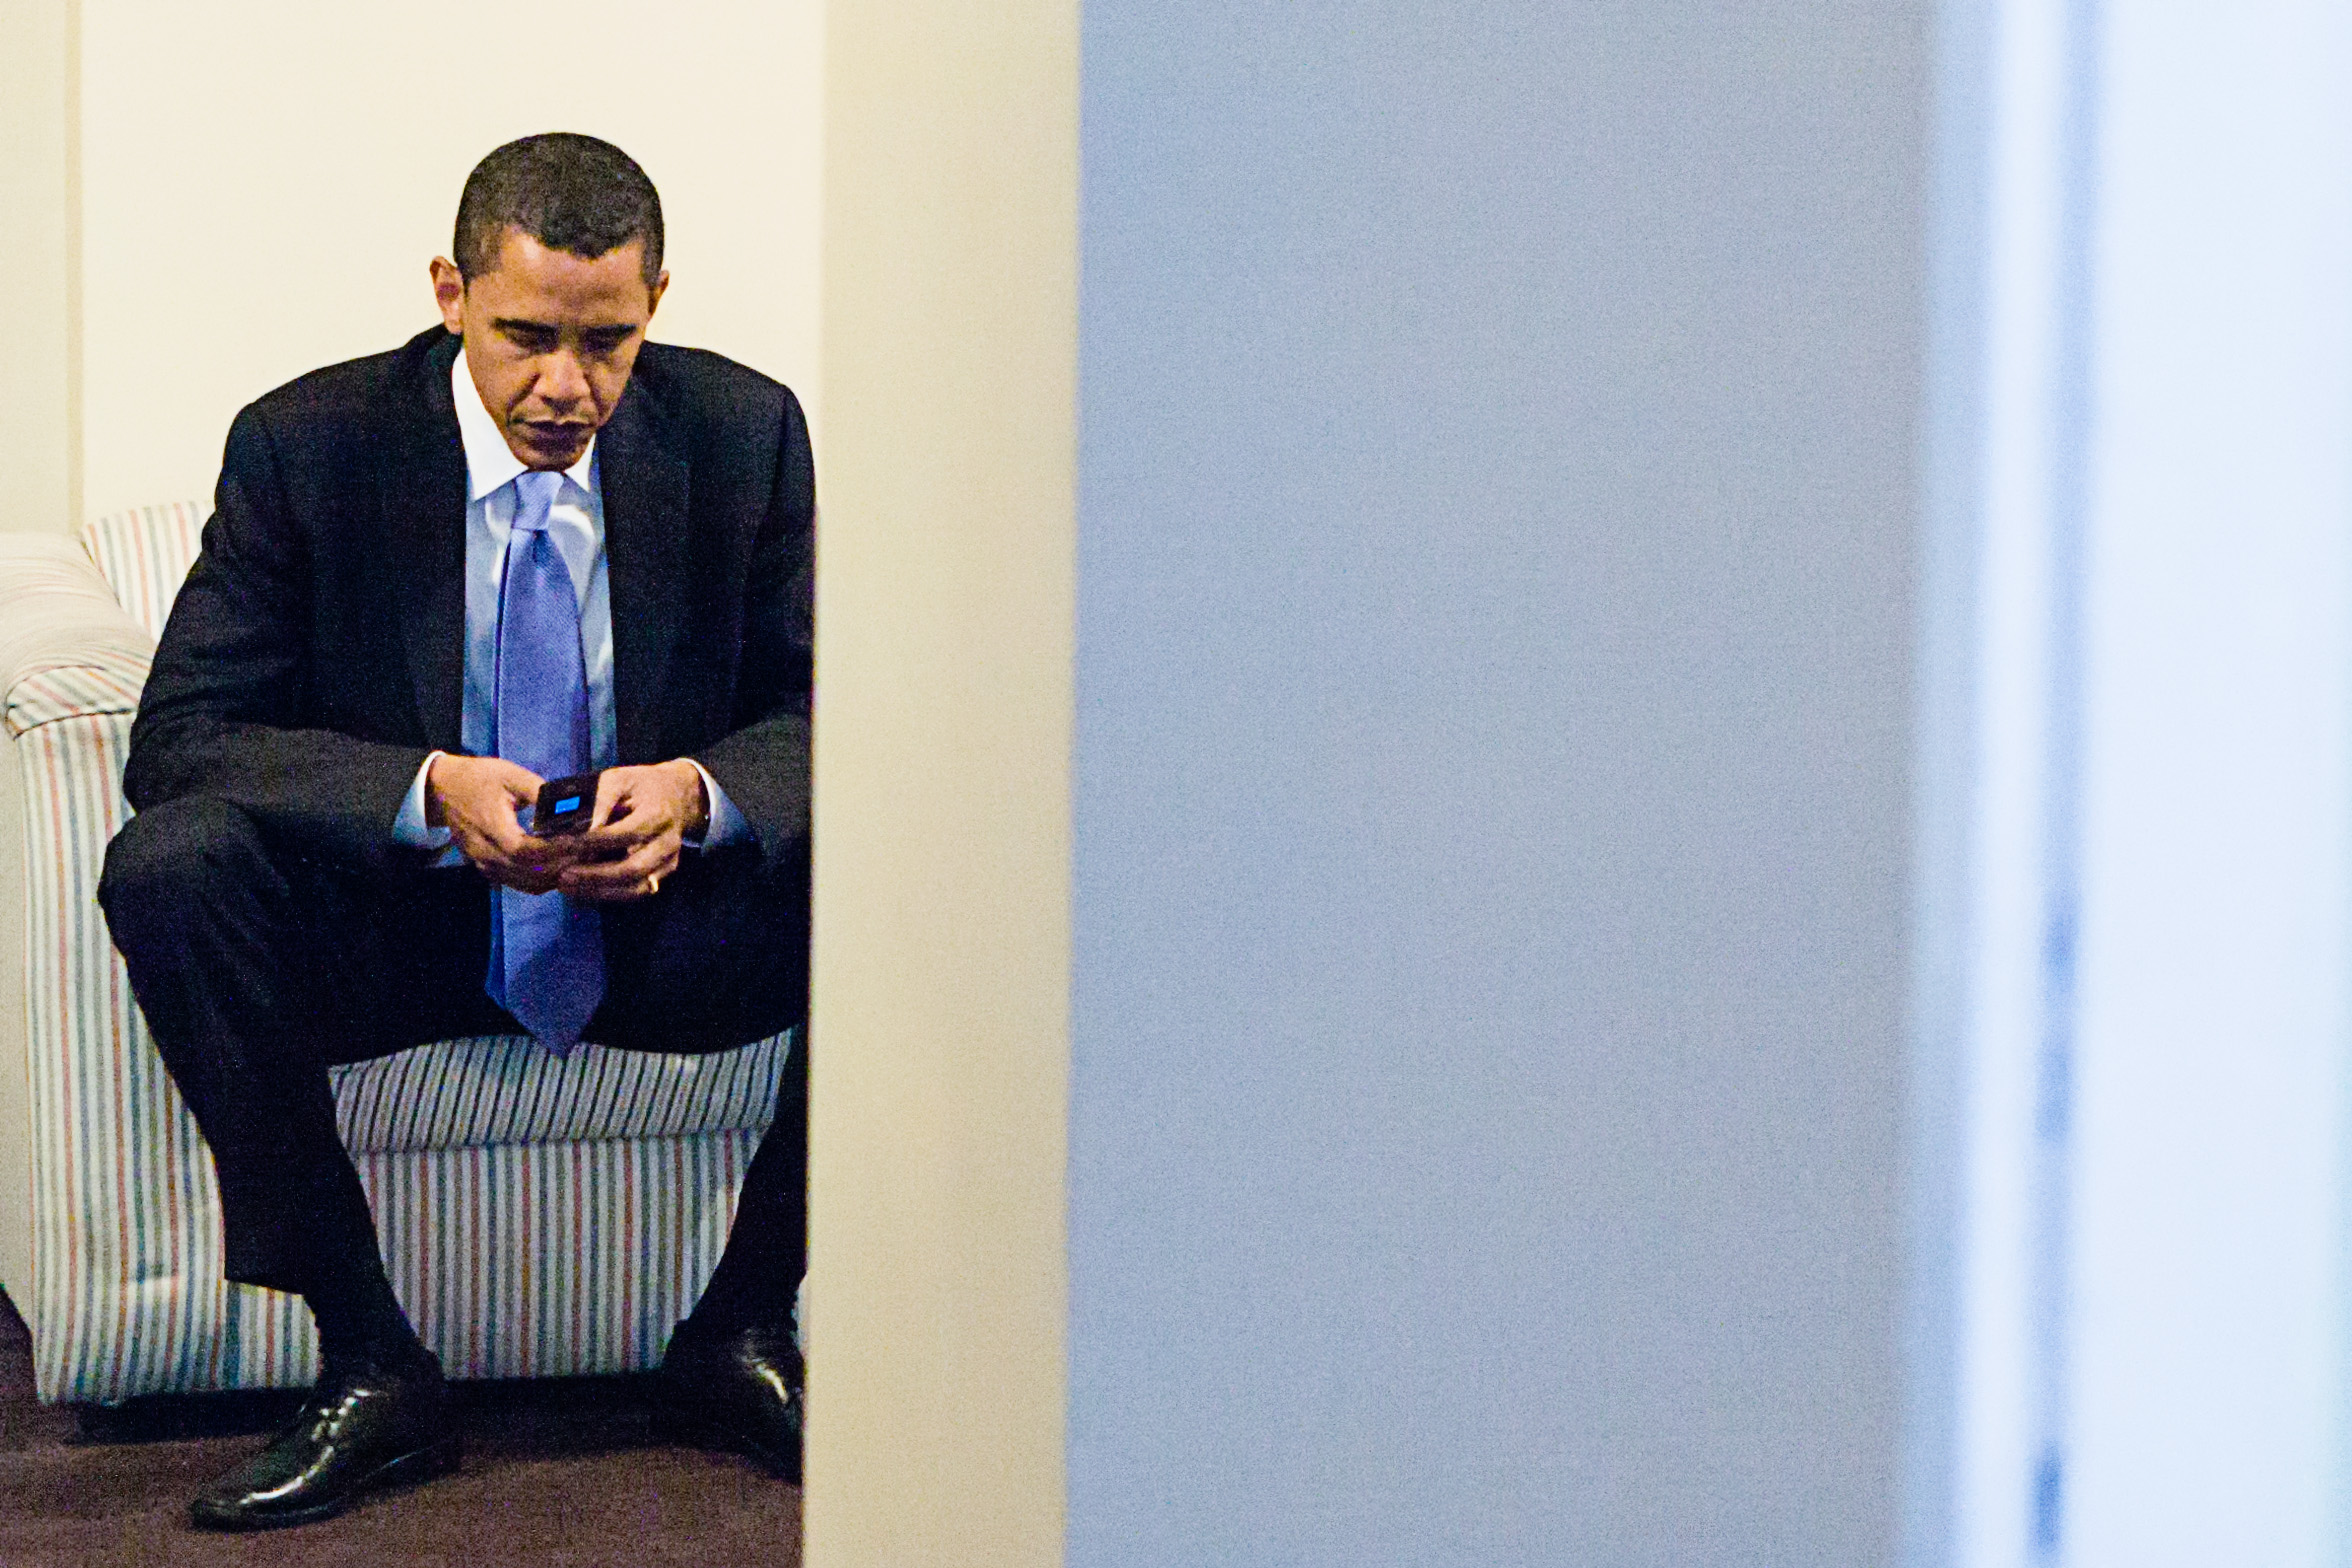 Obama sitting on couch with cell phone